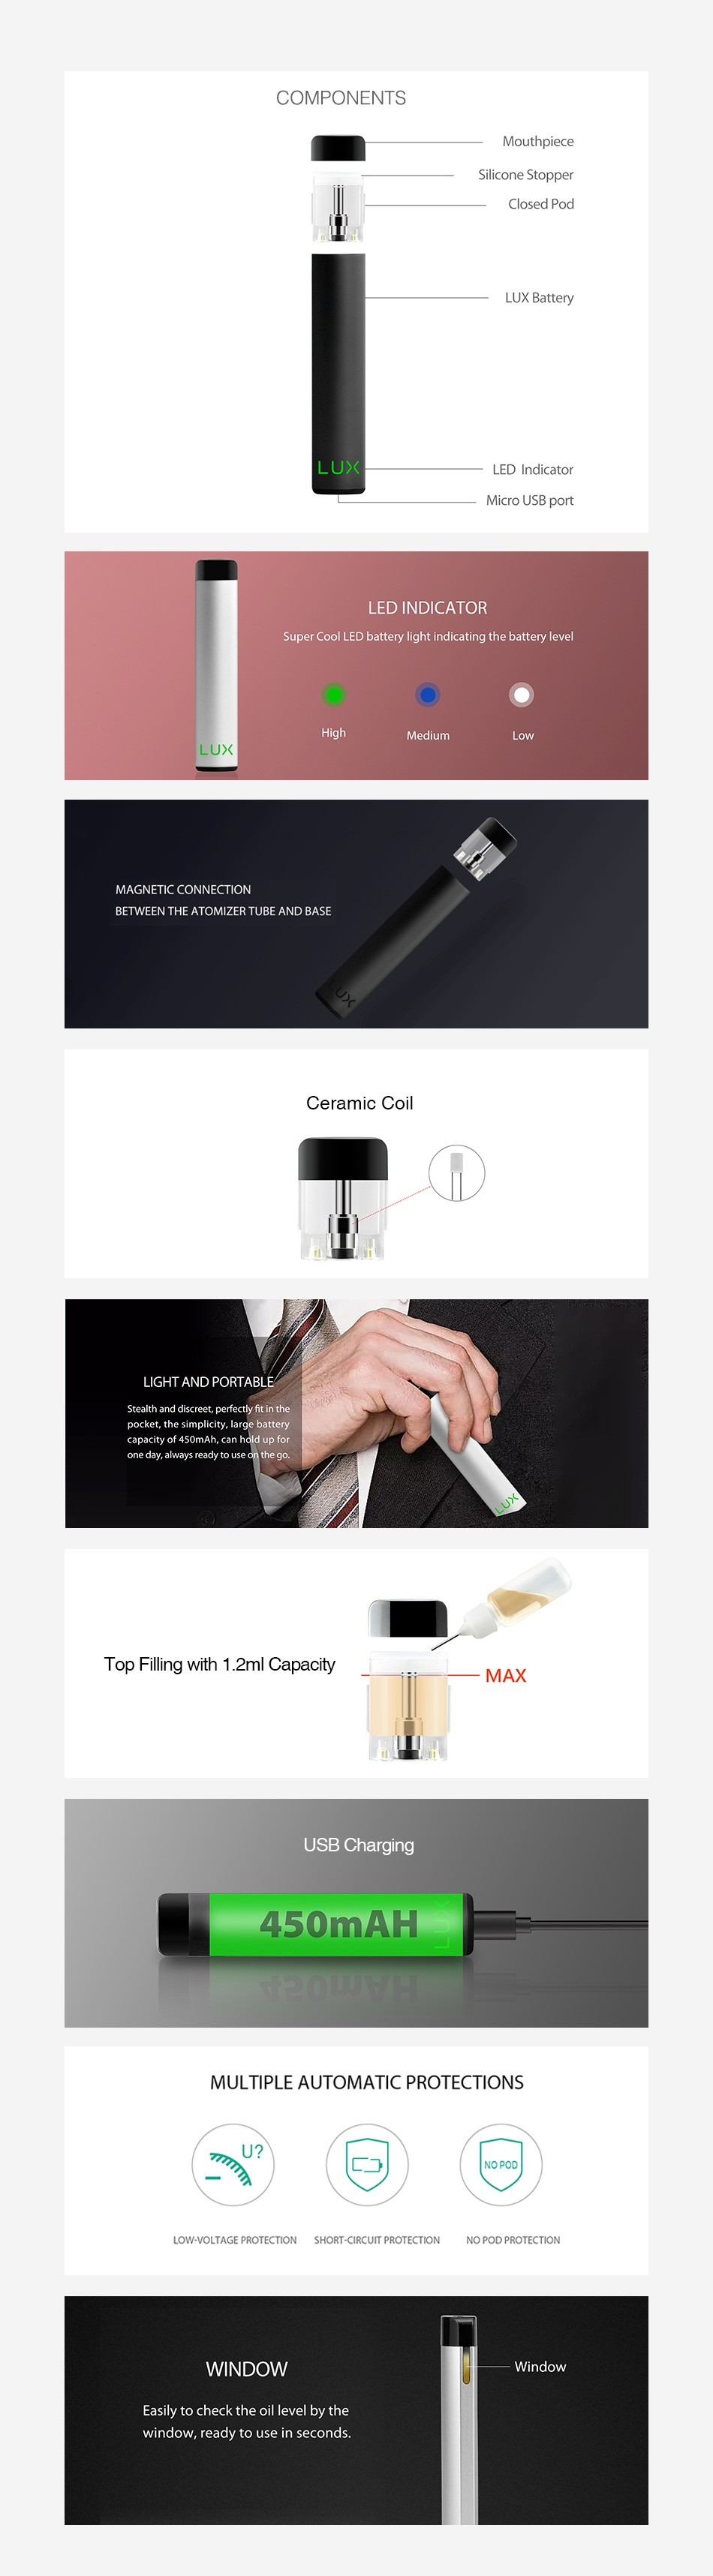 WELLON LUX Vape Pen Starter Kit 450mAh COMPONENTS Mouthpiece losed Pod LUX Battery BETWEEN THE AICM ZER IU BE AND BASE Ceramic coil Top Filling with 1 2ml Capacity MAX 450mAH MULTIPLE AUTOMATIC PROTECTIONS LOVJ VOLTAGE FROTECTYN SHDRT ORCUIT FROTECTON NO FCO FROTECTION INDOW